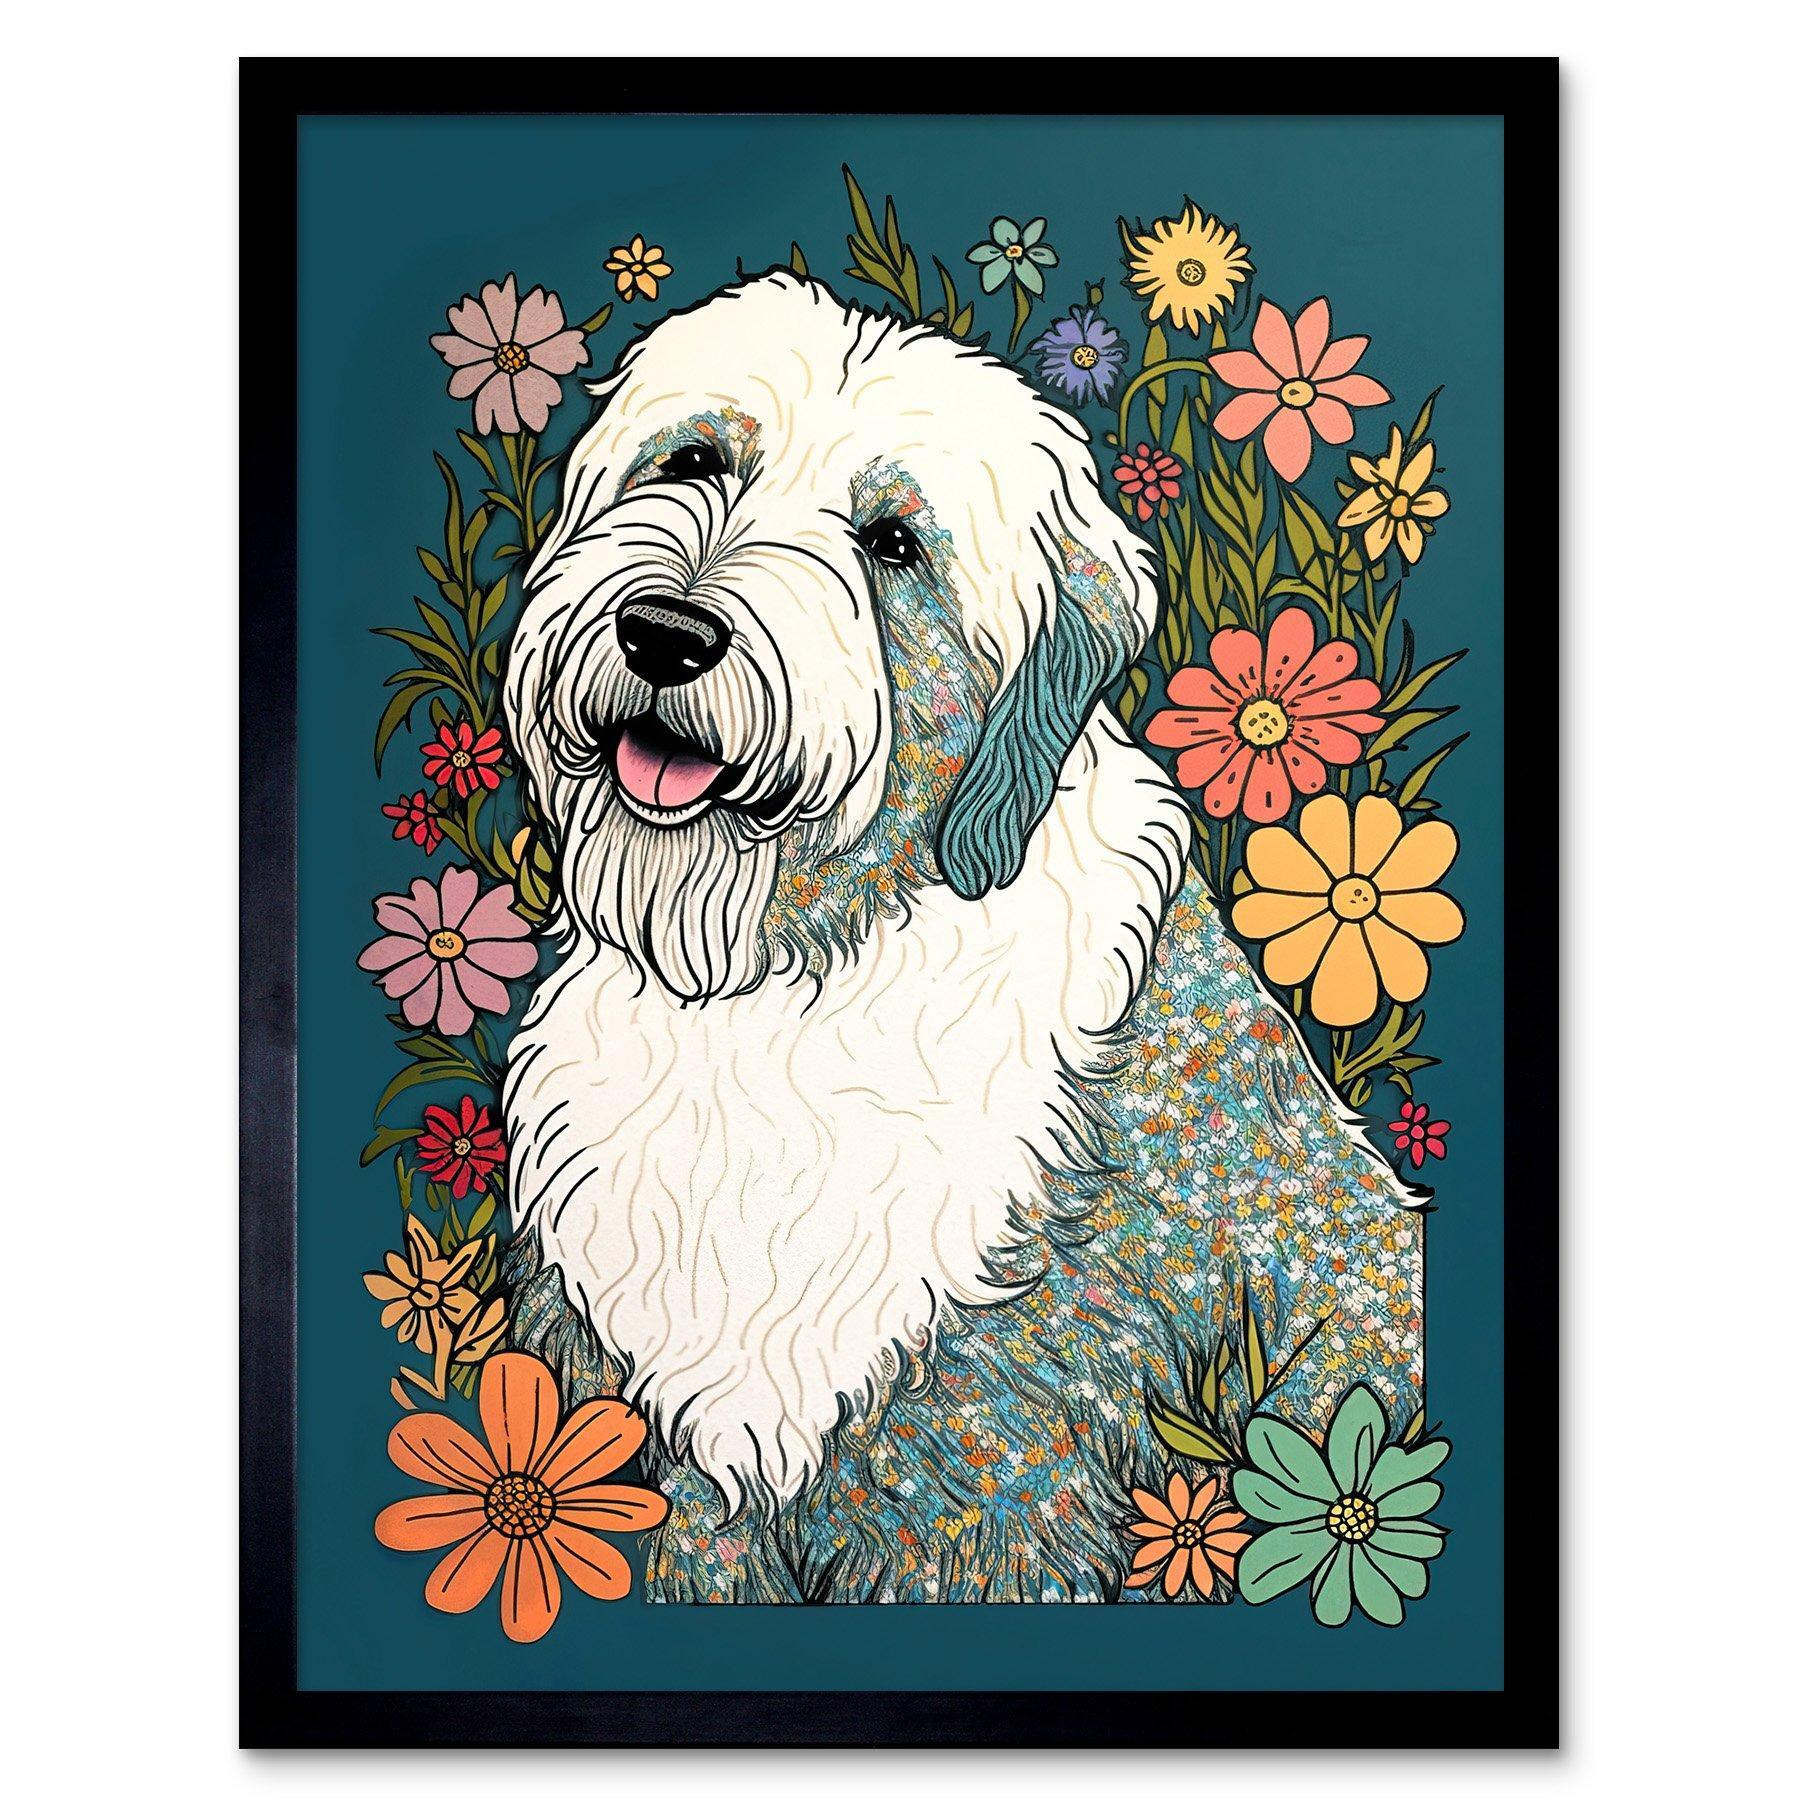 English Sheepdog with Multicolour Daisies Bright Flowers Modern Illustration Art Print Framed Poster Wall Decor 12x16 inch - image 1